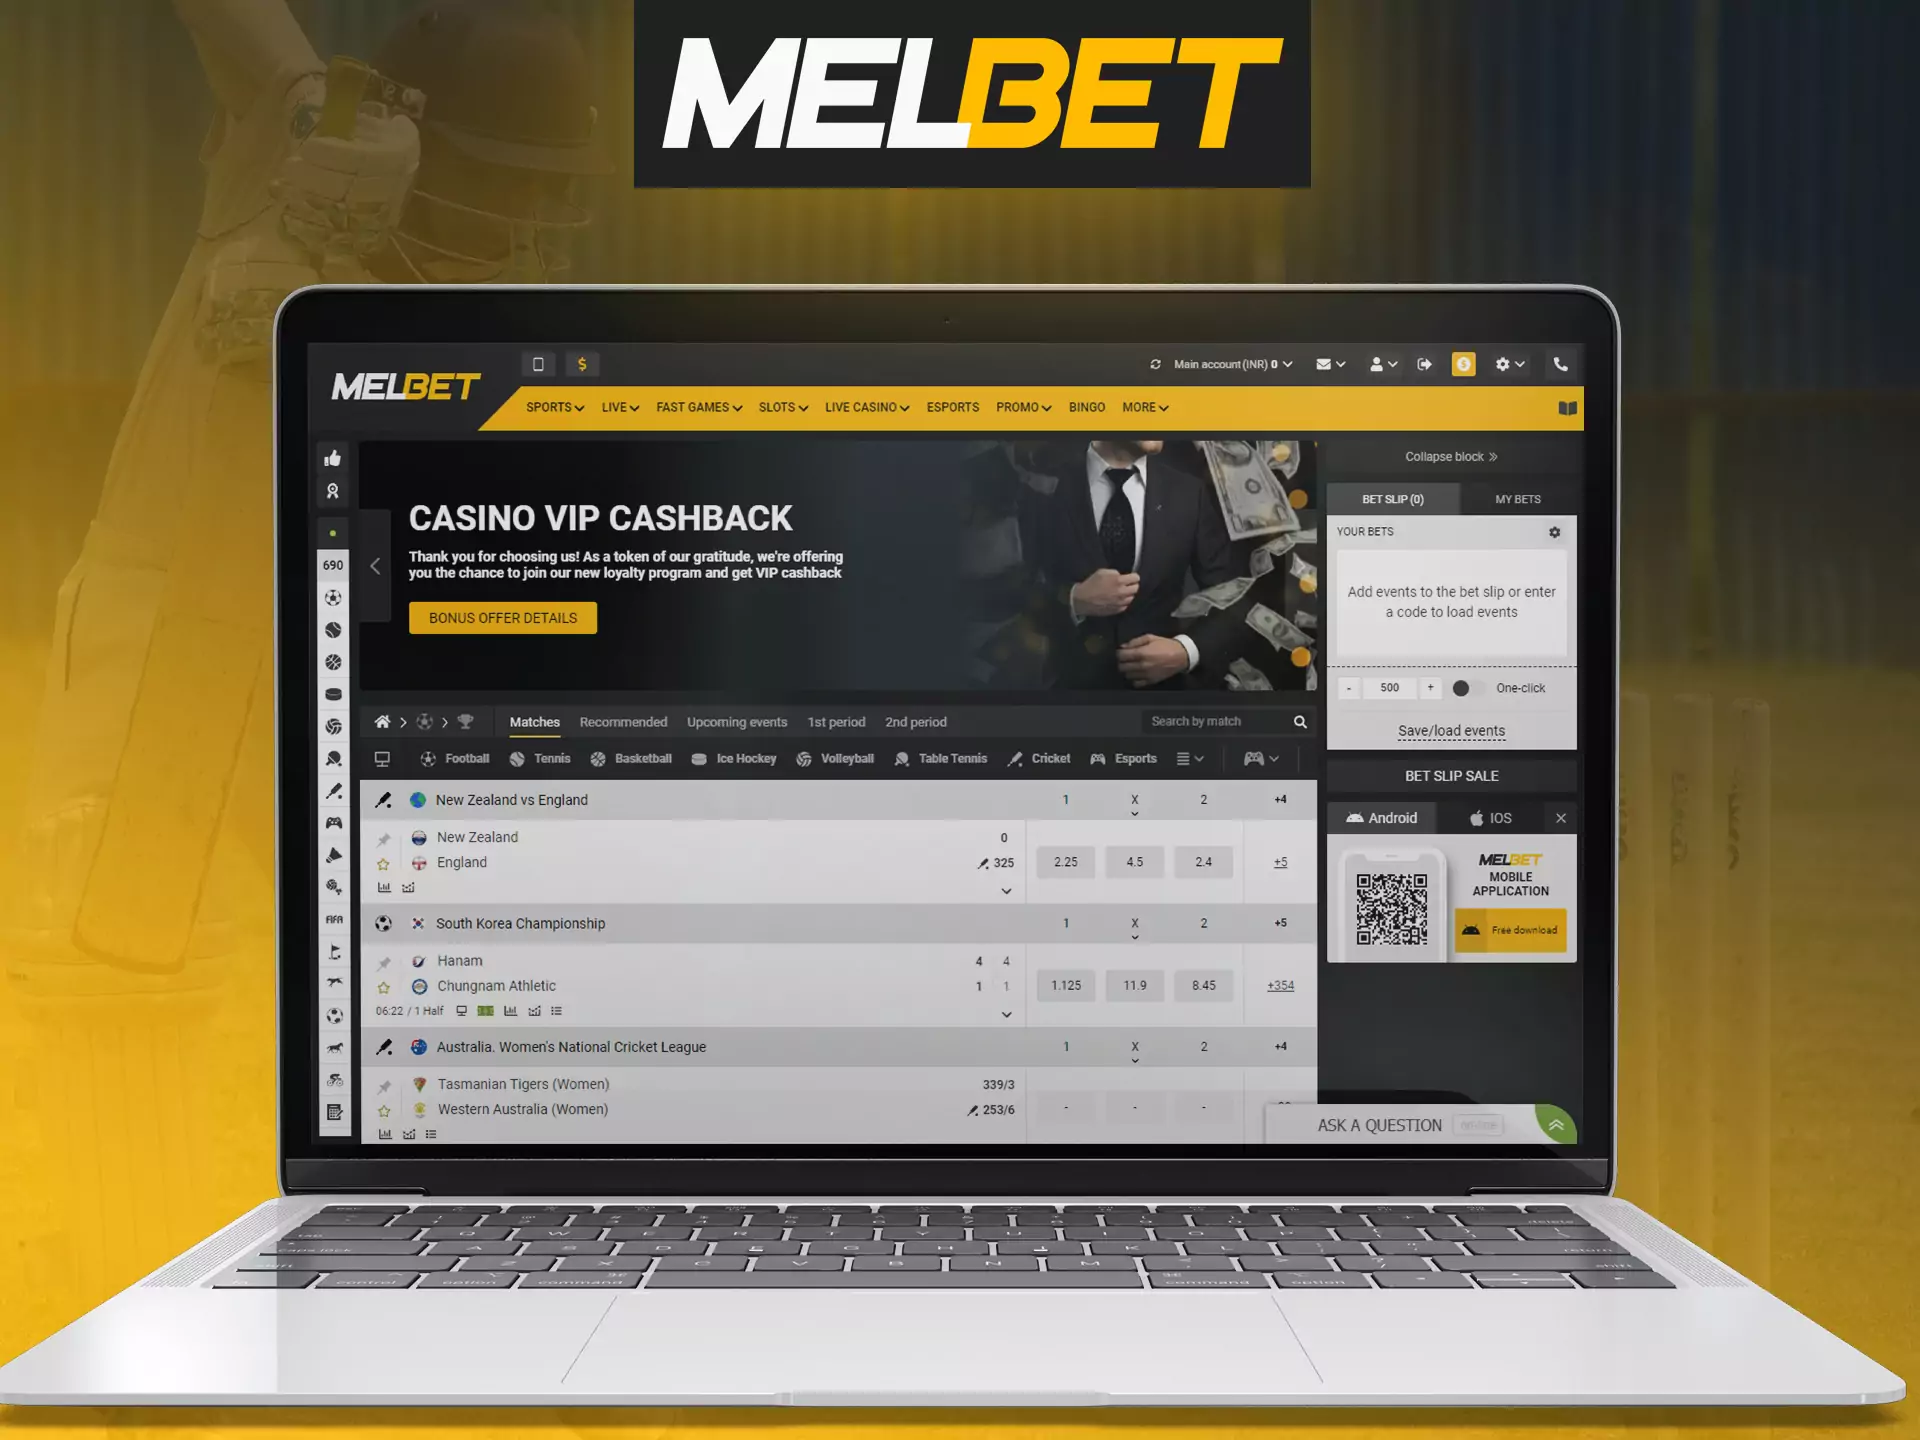 PC version of Melbet provides wide variety of options.